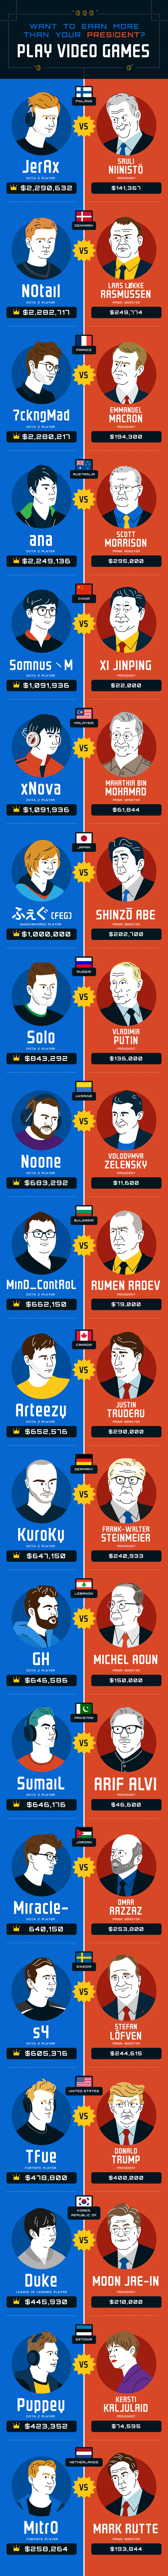 Infographic for Want to Earn More Than Your President? Play Video Games